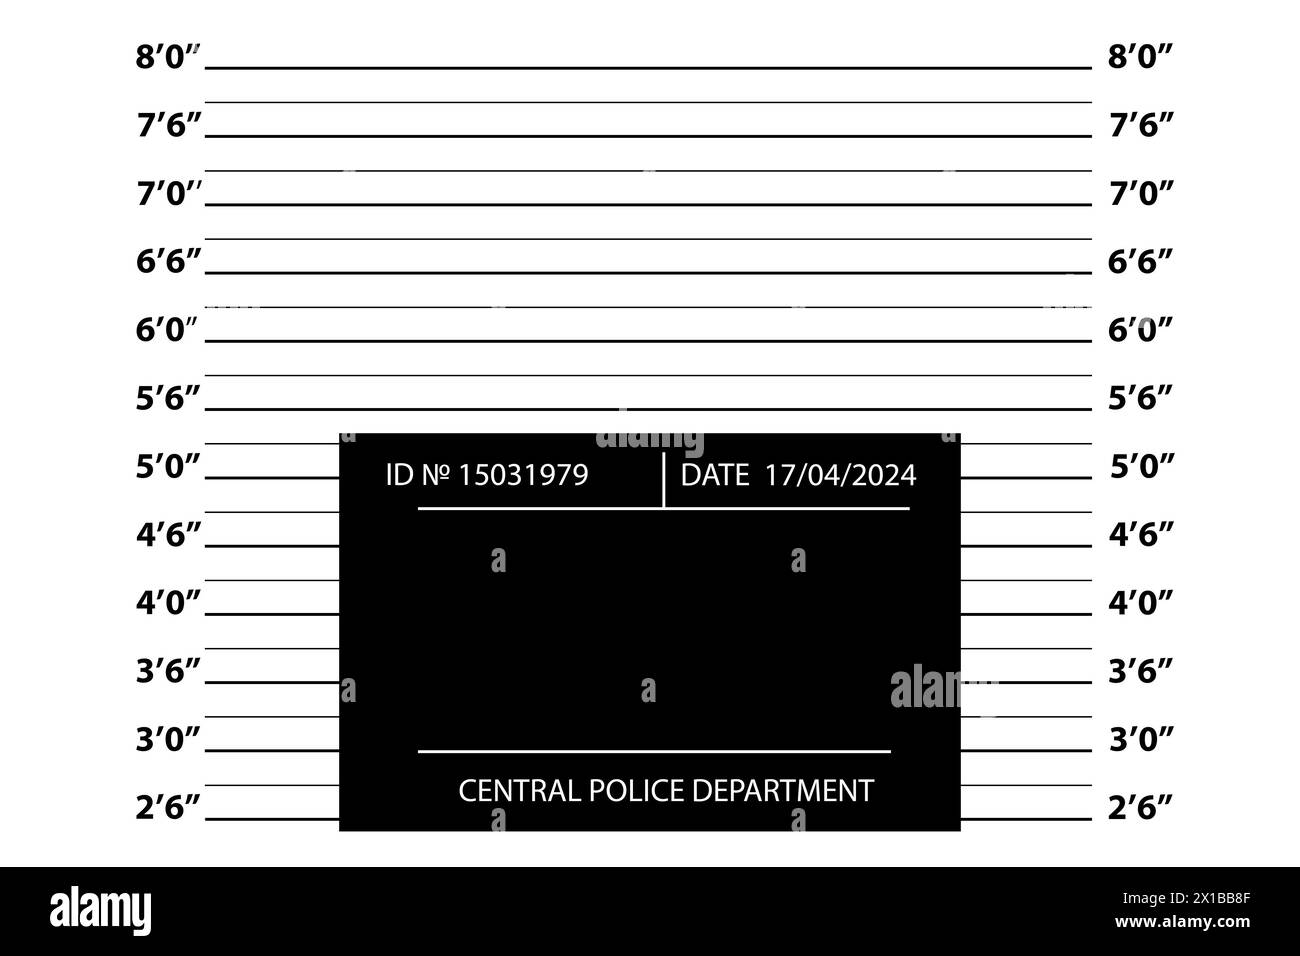 Blank police department card with stadiometer background. Central Police Headquarters, date, ID. Stock Photo